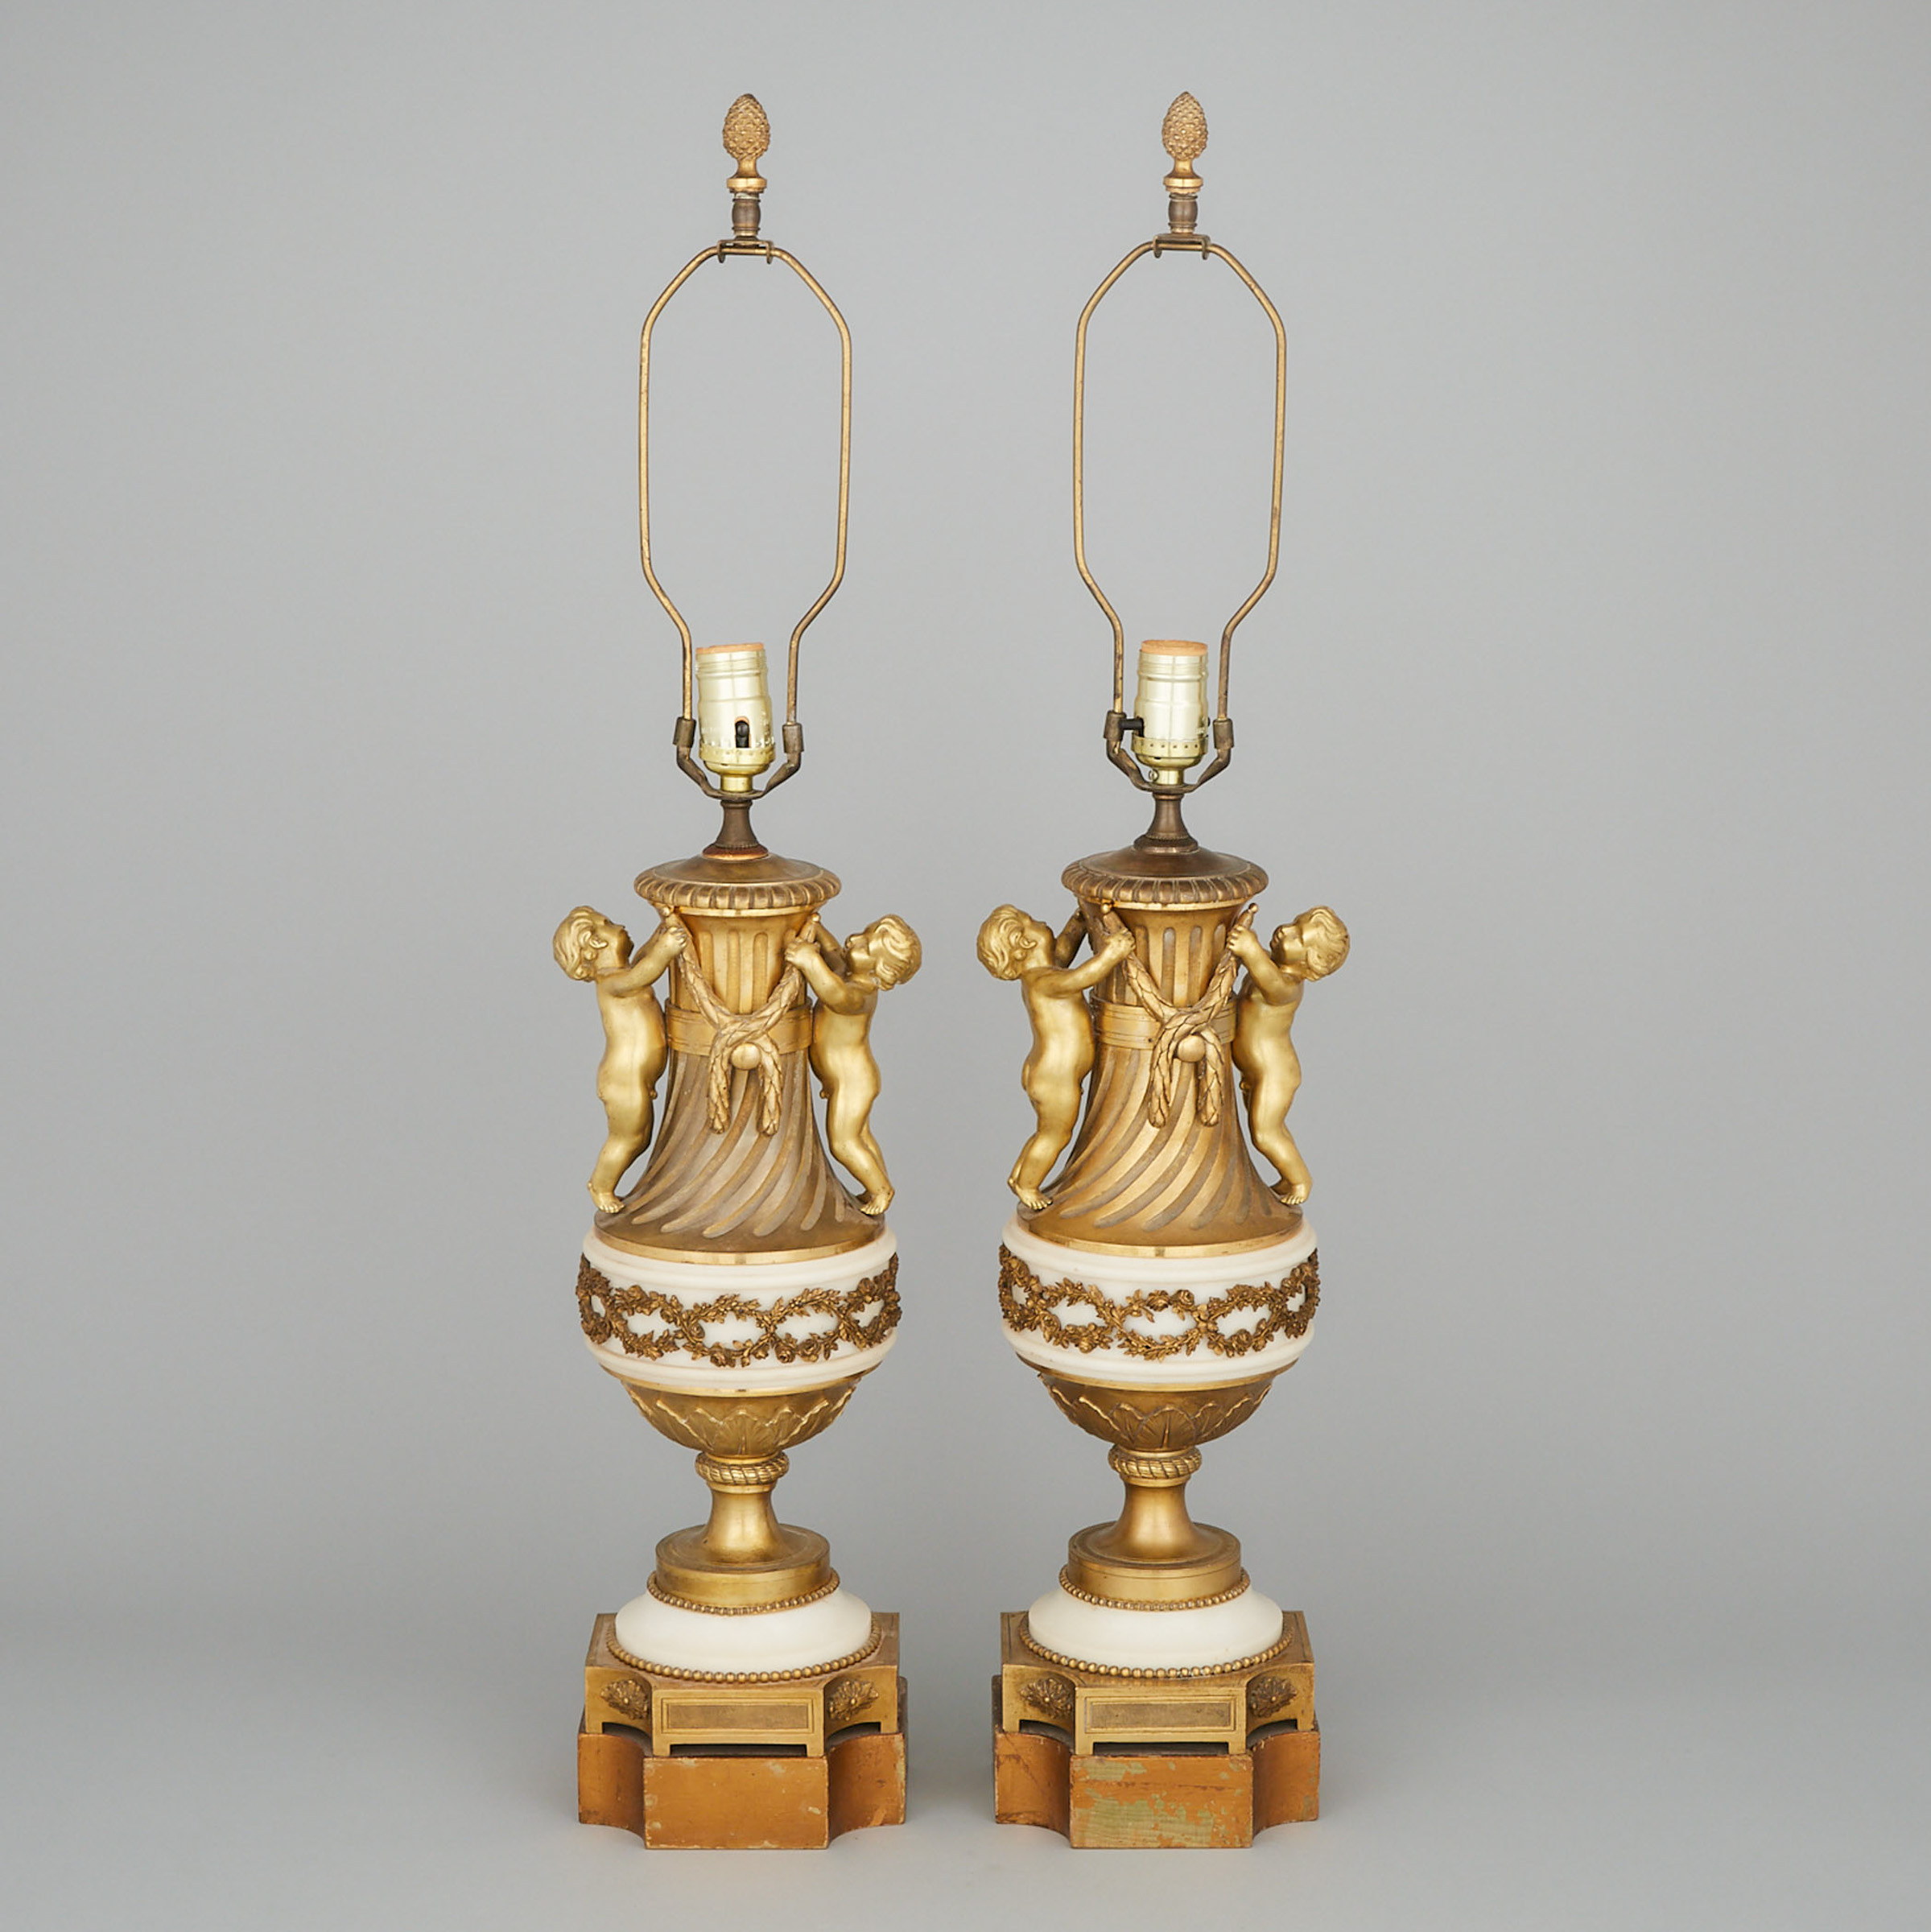 Pair of Louis XVI Style White Marble Mounted Gilt Bronze Table Lamps, mid 20th century